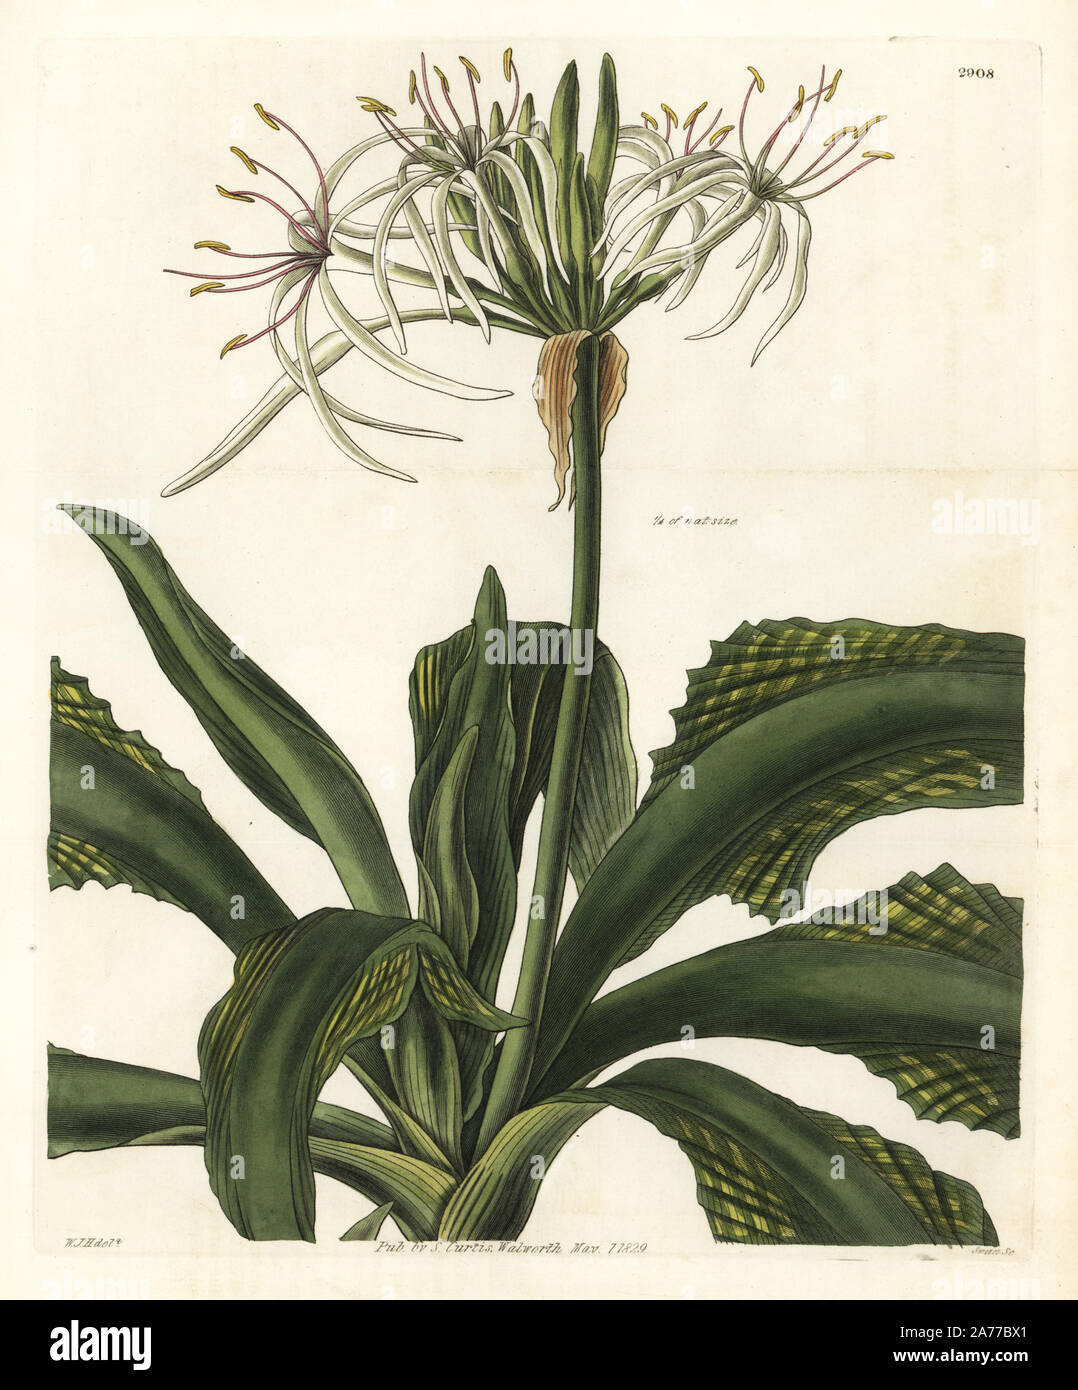 Giant crinum lily, Crinum asiaticum (Plaited leaved crinum, Crinum plicatum). Handcoloured copperplate engraving by Swan after an illustration by William Jackson Hooker from Samuel Curtis's 'Botanical Magazine,' London, 1829. Stock Photo